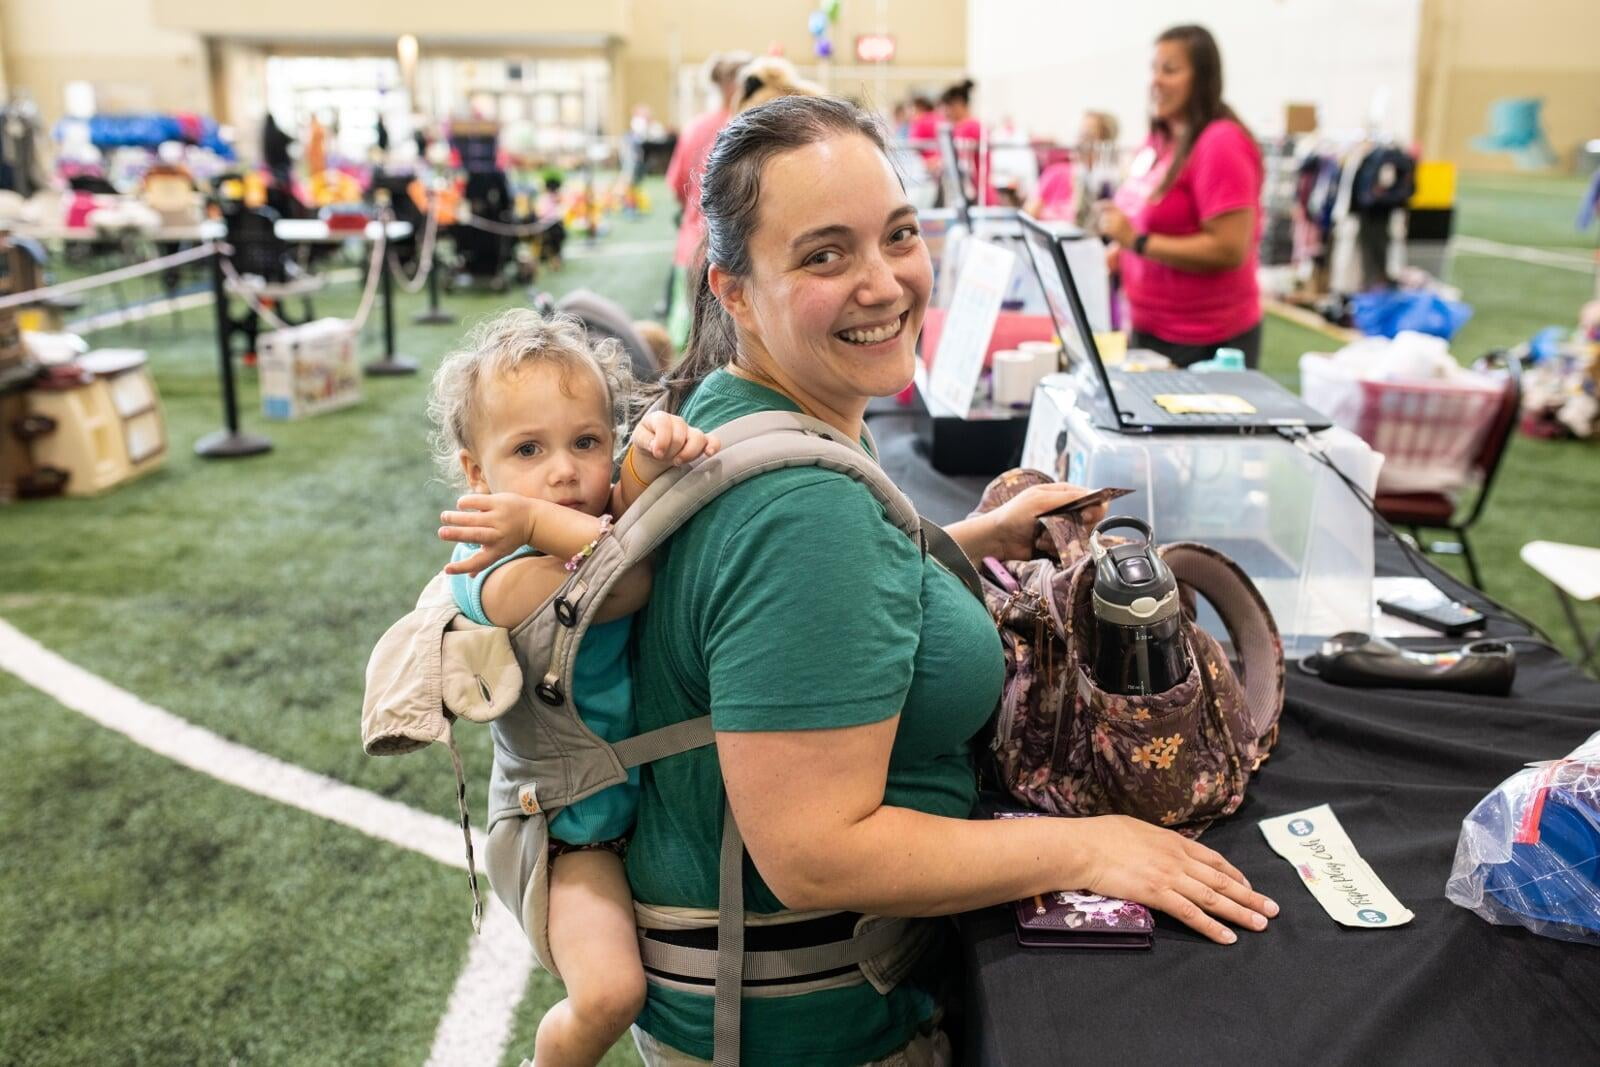 Beautiful mom holds two boys tops—one in each hand—as she shops the deals at her local sale.